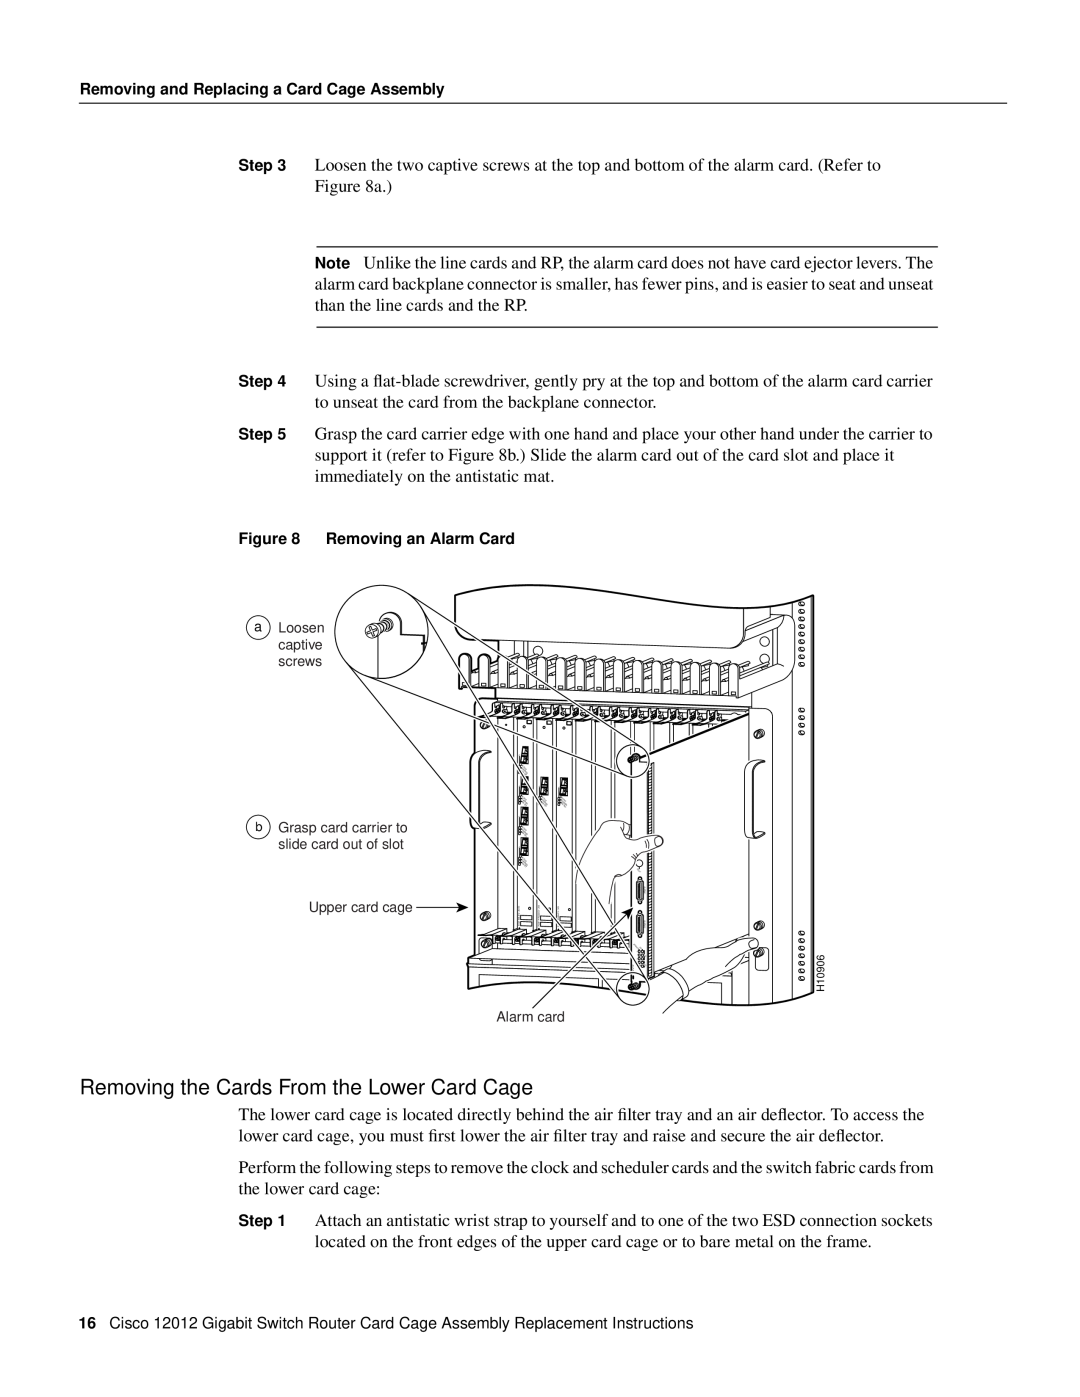 Cisco Systems 12012 manual Removing the Cards From the Lower Card Cage, Q OC-3/STM-POS, OC-12/STM-4 ATM, OC-12/STM-4 POS 